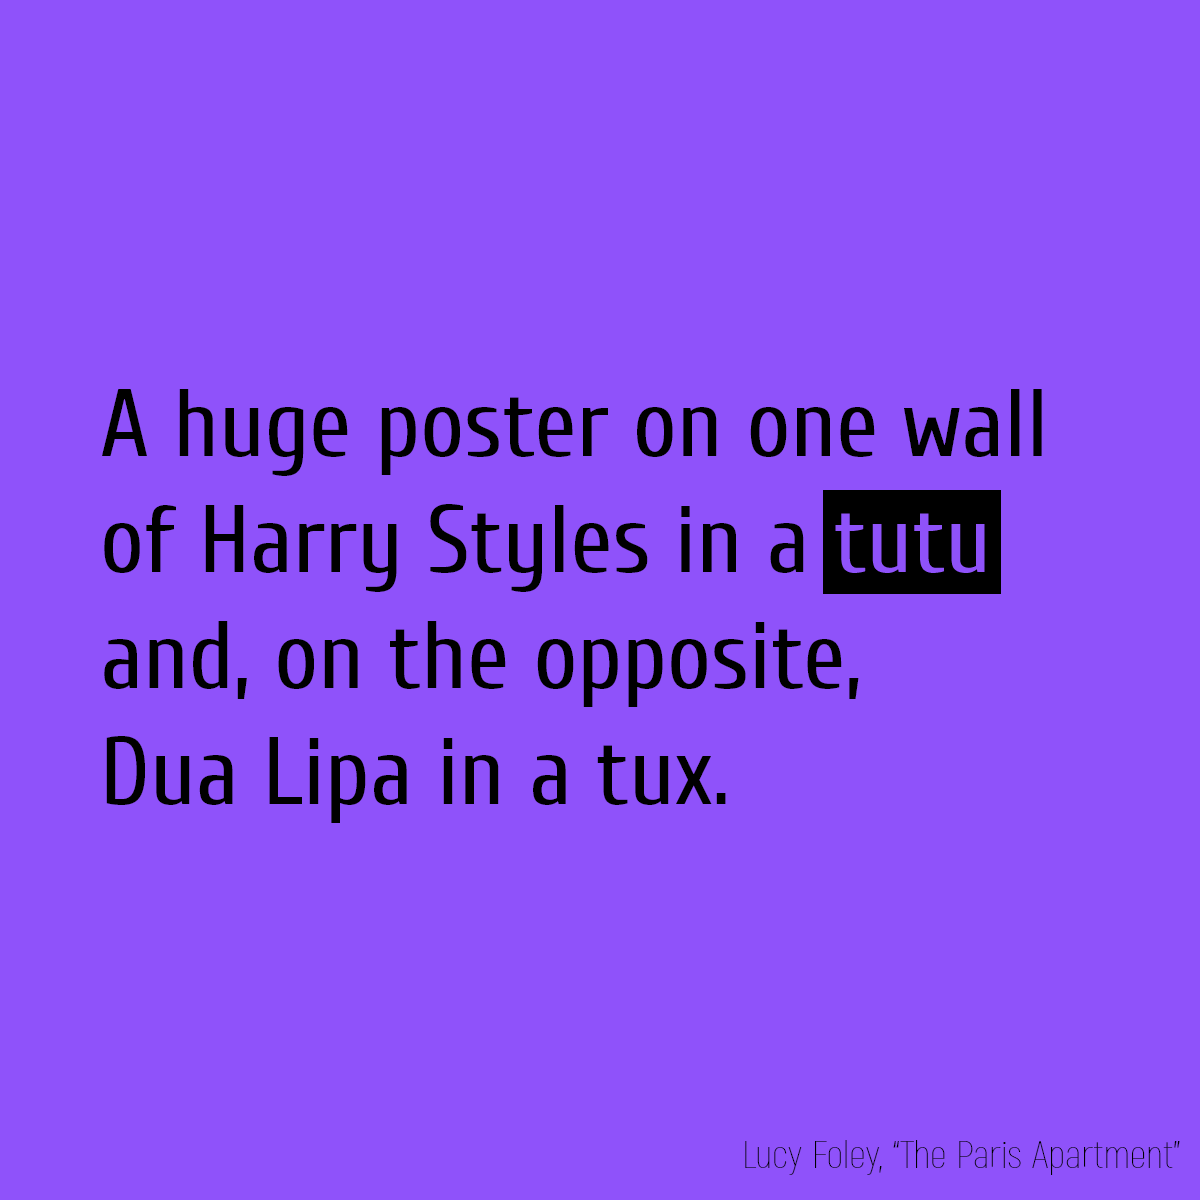 A huge poster on one wall of Harry Styles in a **tutu** and, on the opposite, Dua Lipa in a tux.